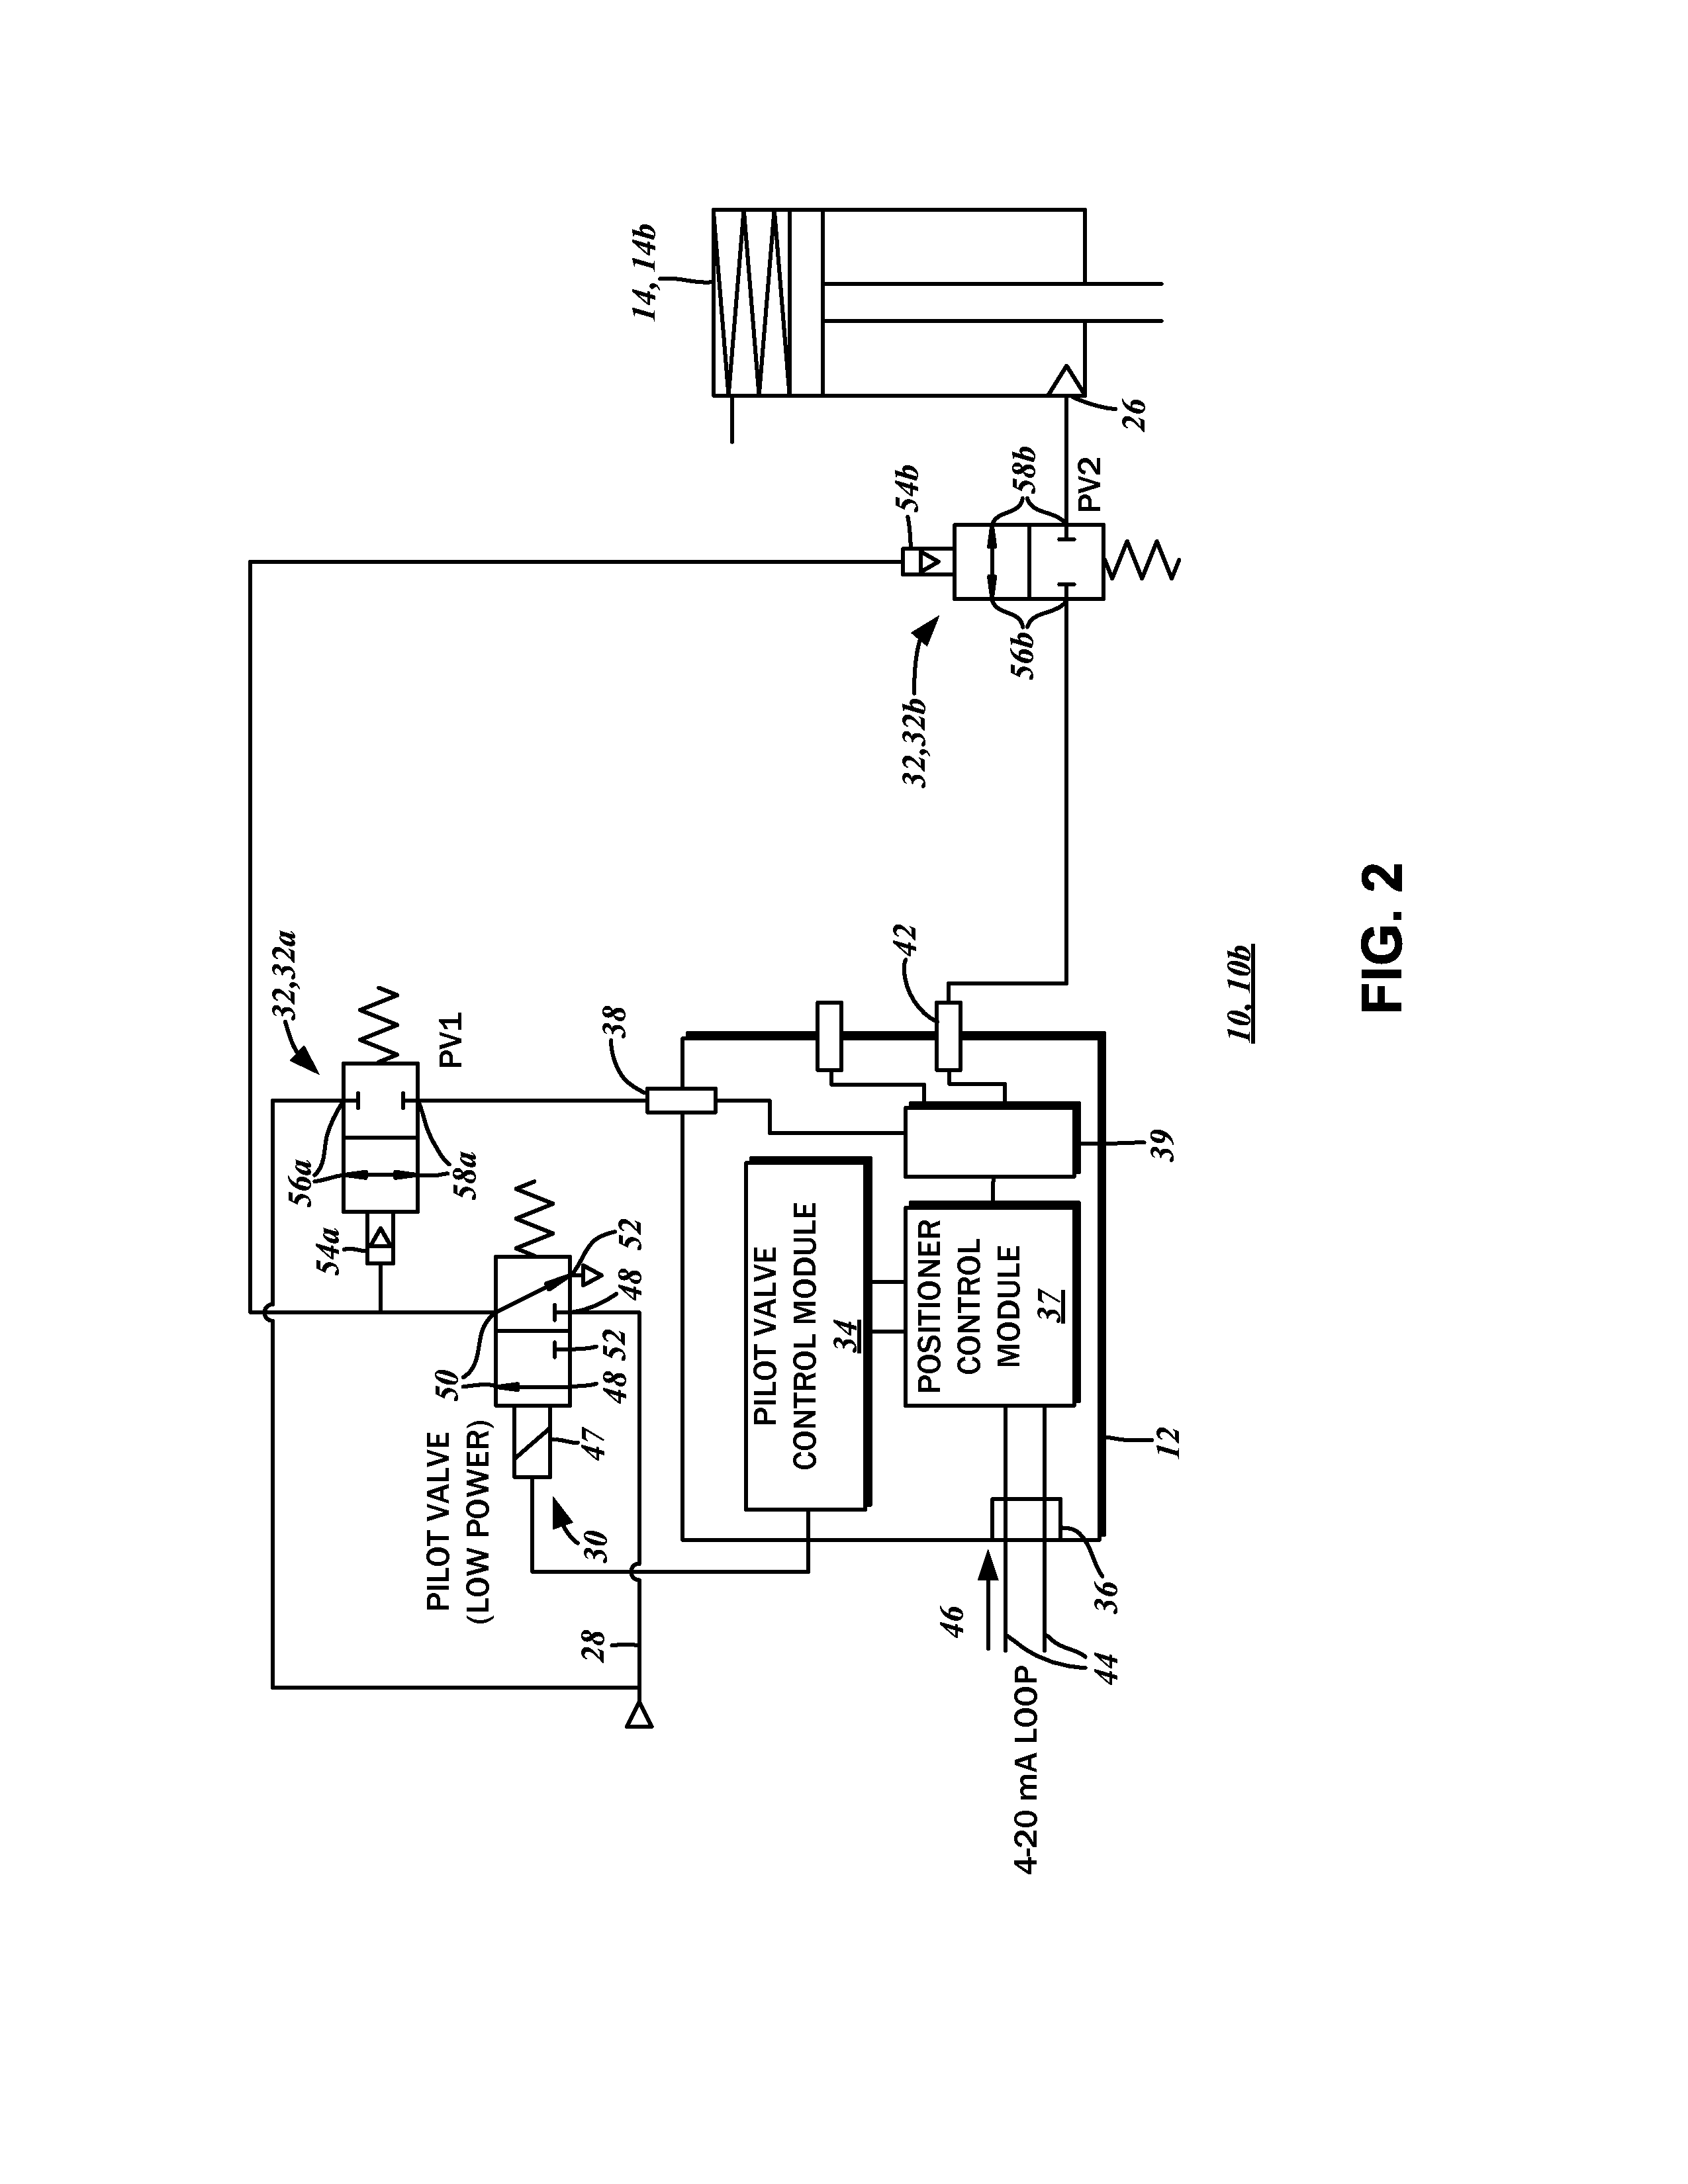 Valve positioning system with bleed prevention